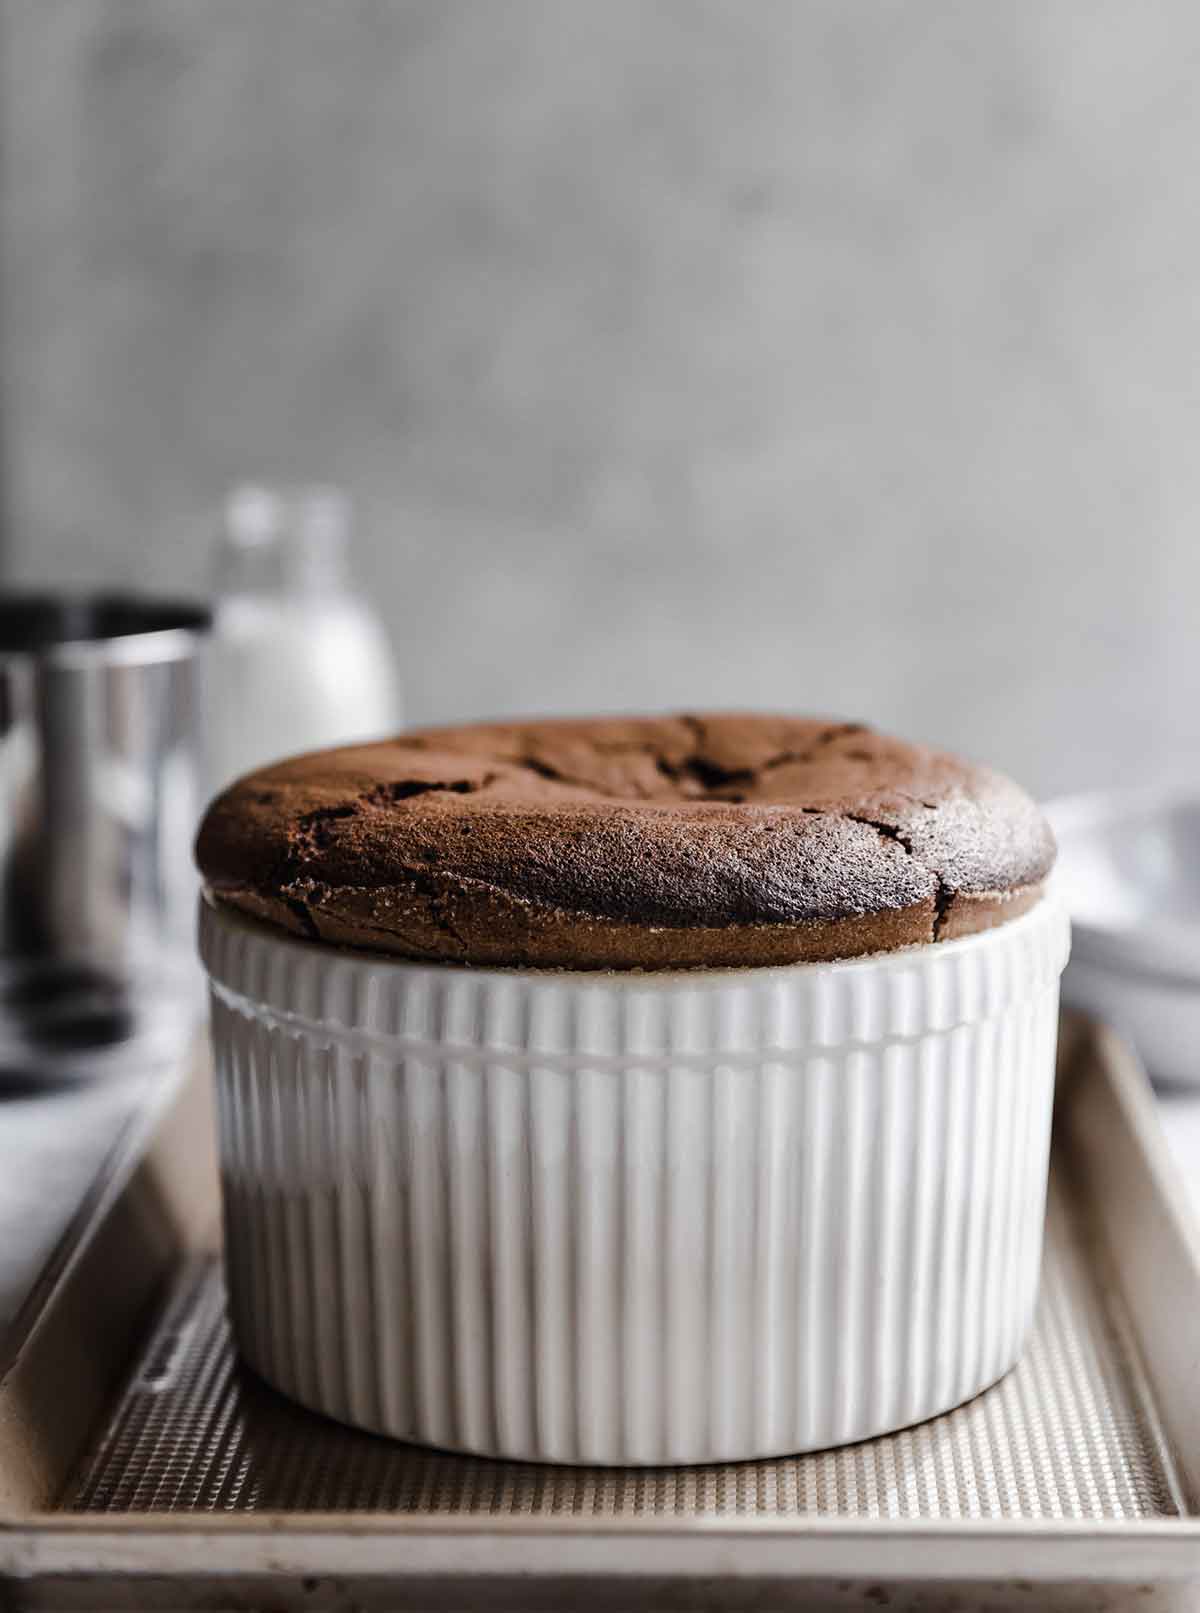 Straight on photo of a baked chocolate souffle baked in a white souffle dish.